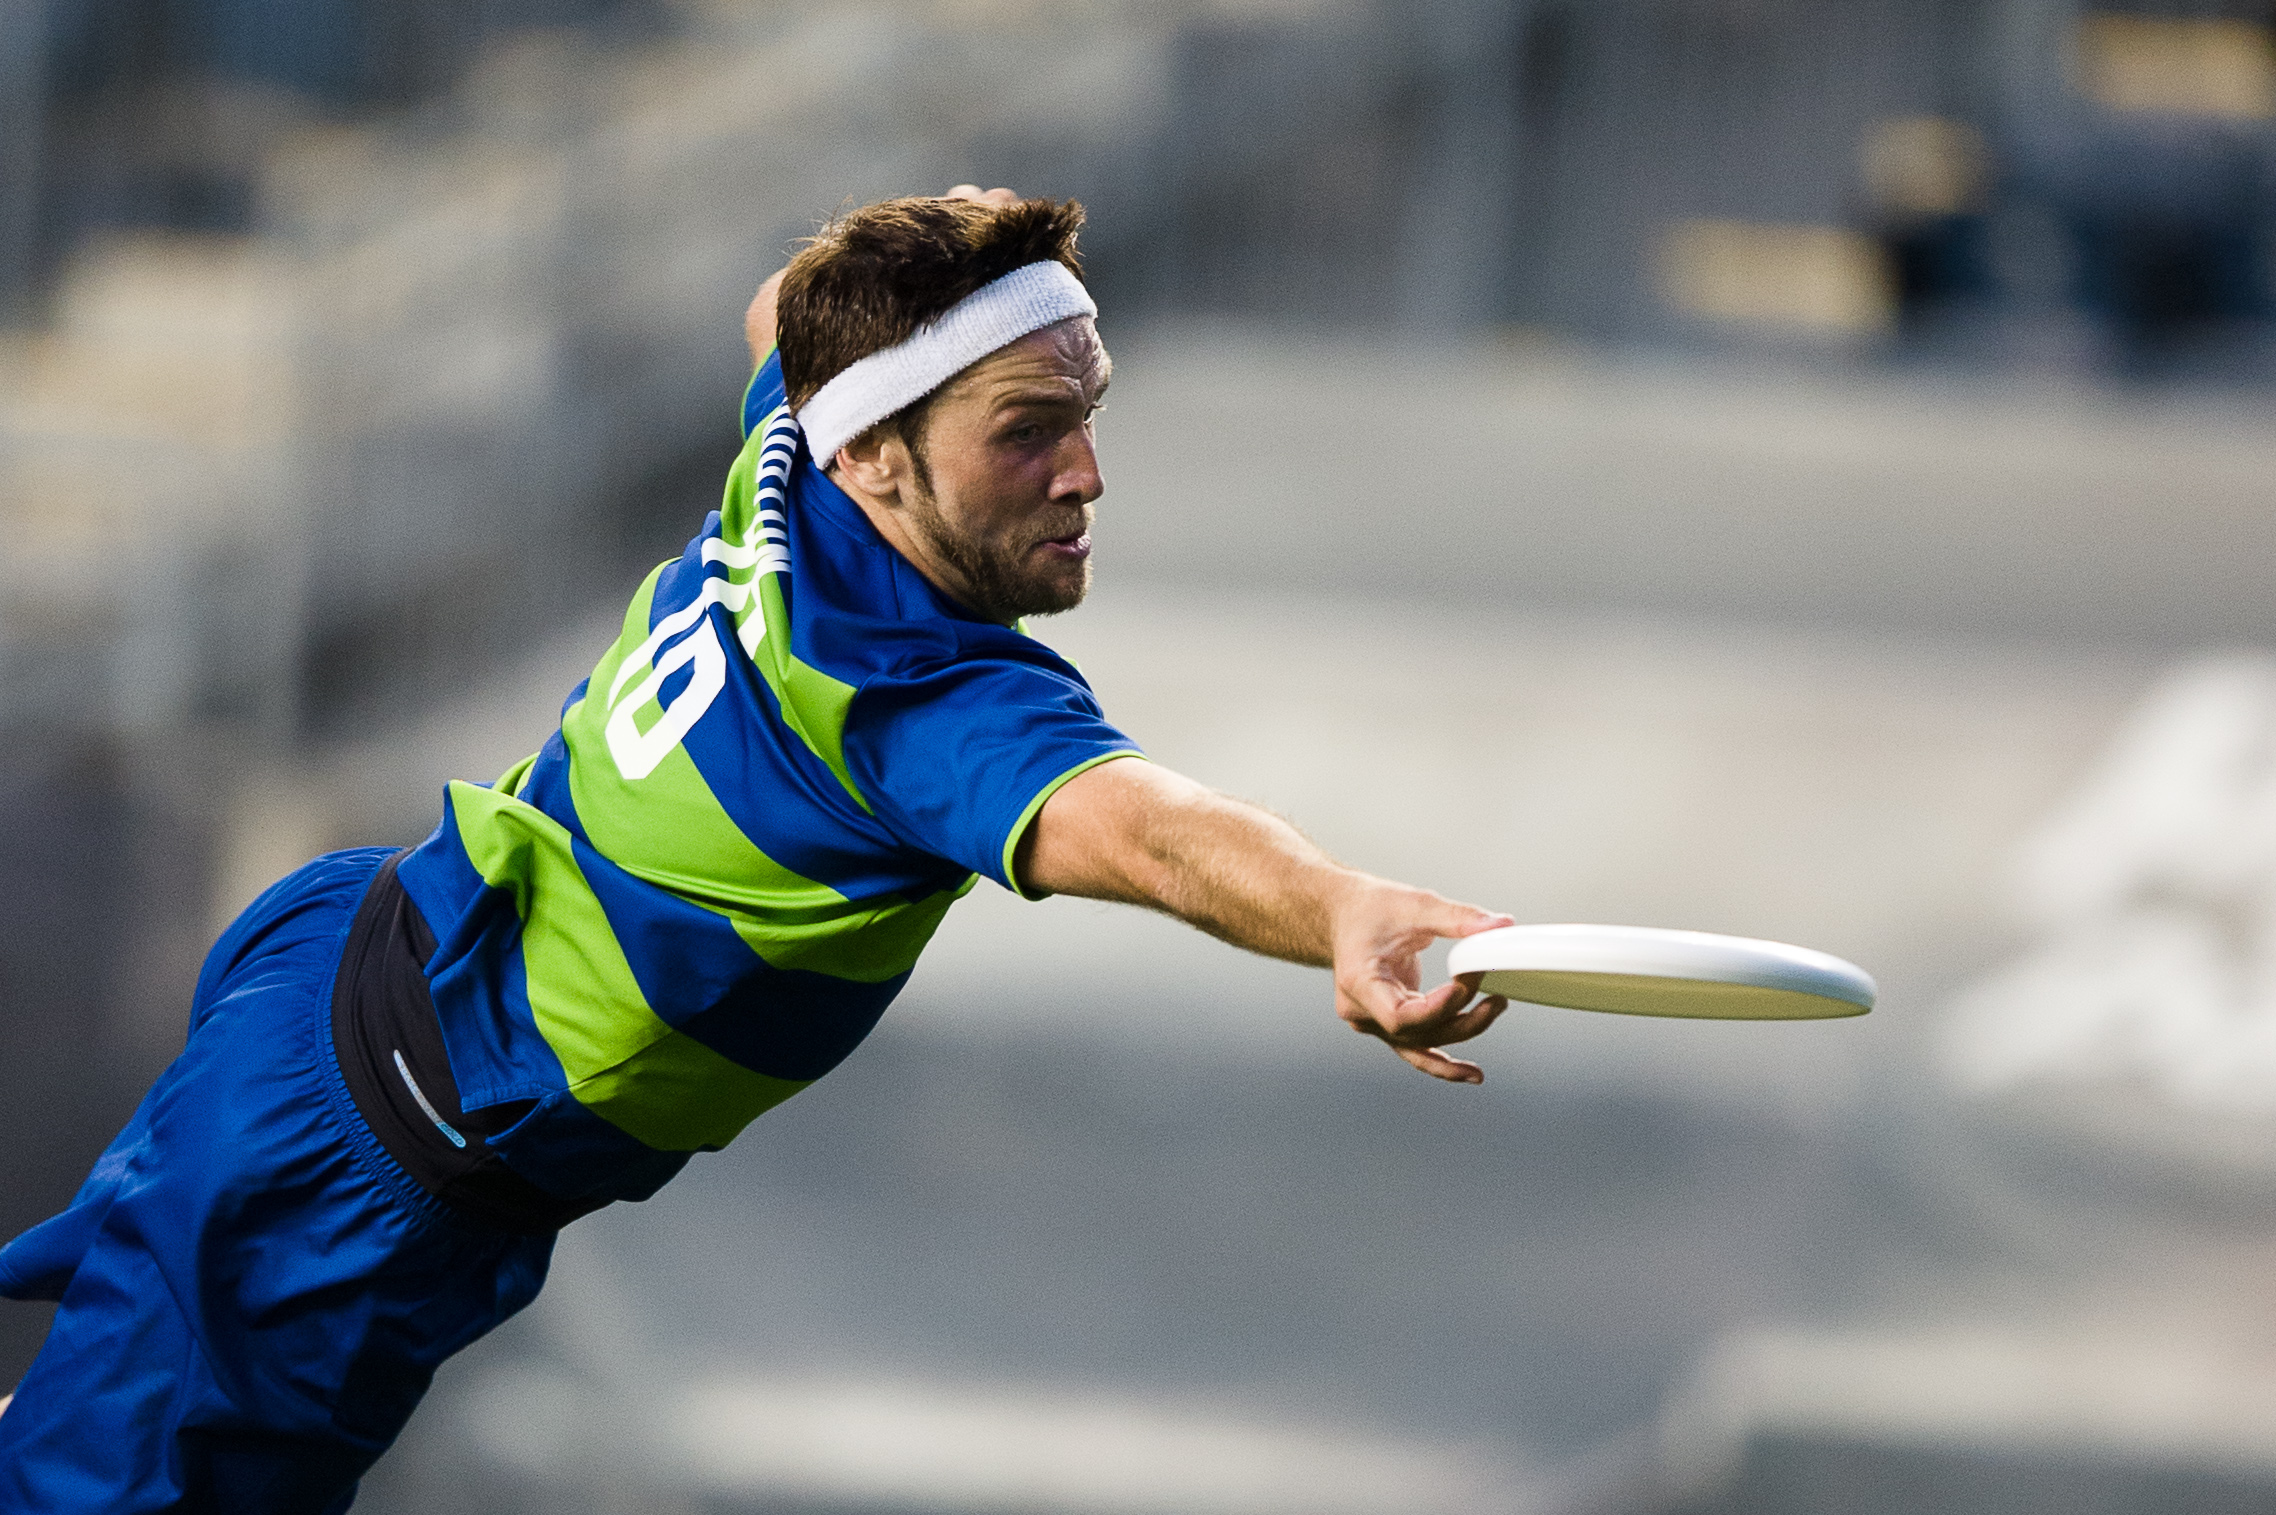 Mark Burton (Seattle Rainmakers #16) layout catch. 2015 Major League Ultimate Championship Game between the Boston Whitecaps and the Seattle Rainmakers. PPL Park, Chester PA, Saturday, August 8, 2015.